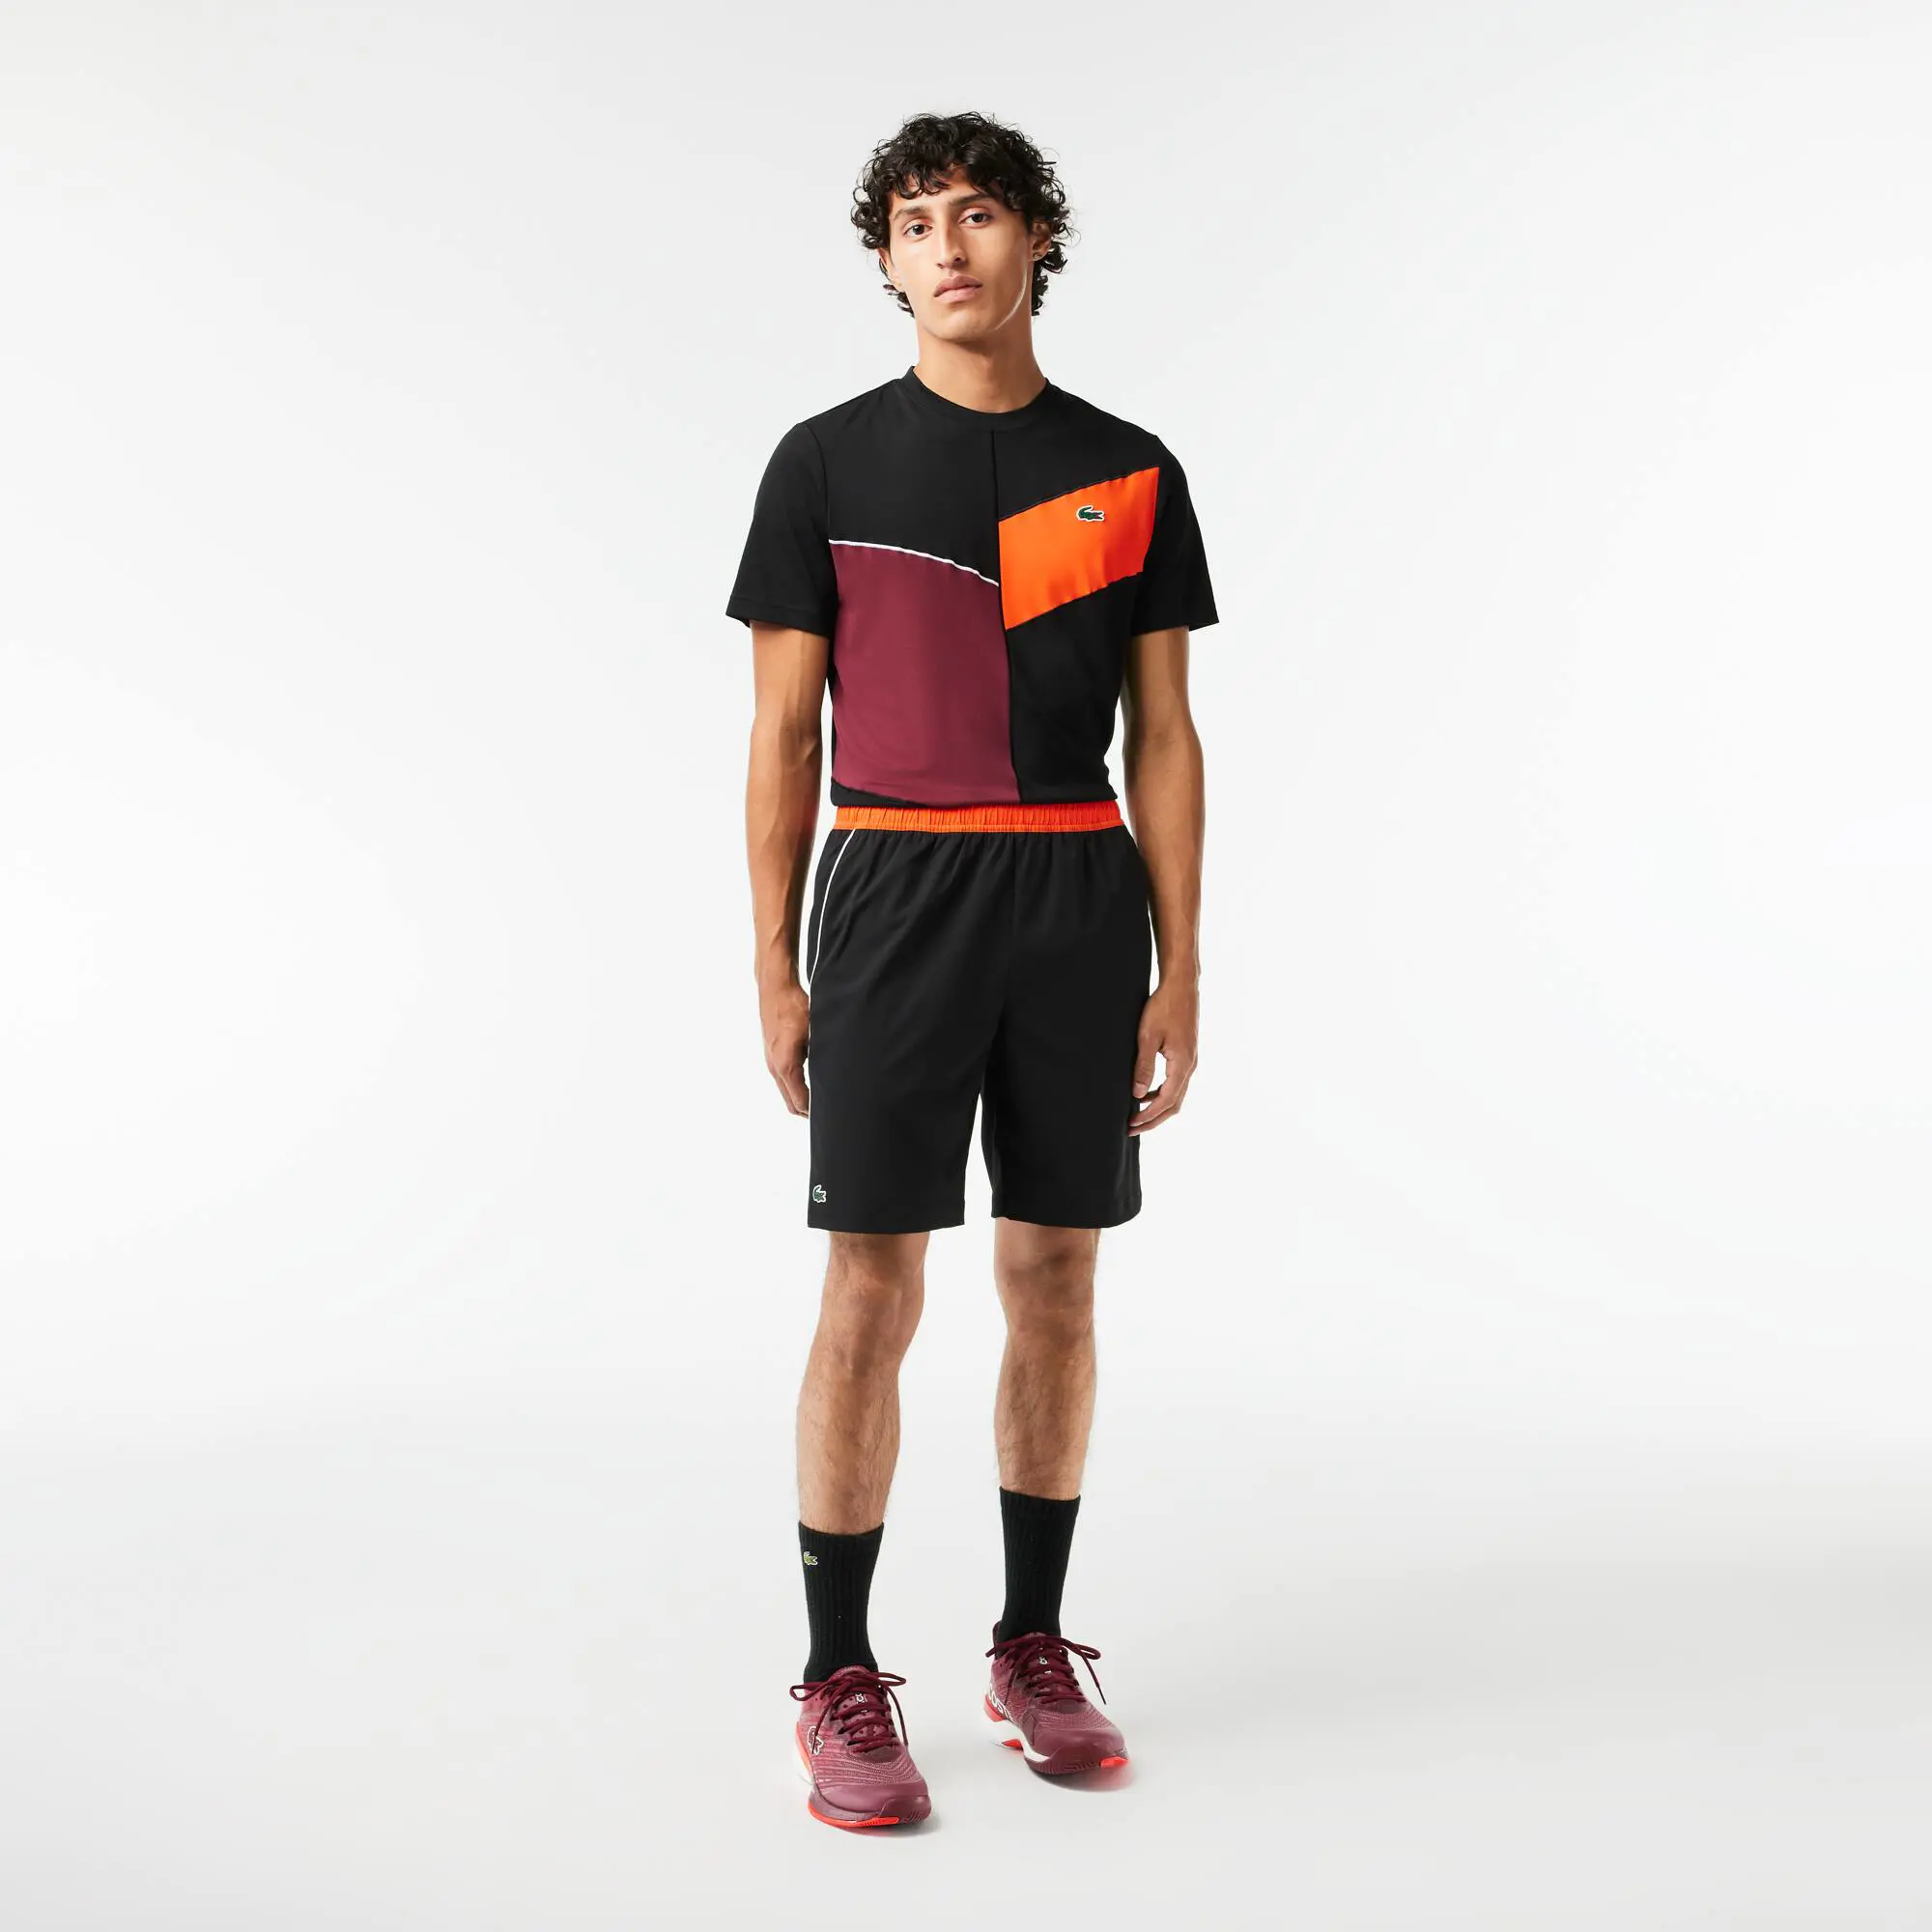 Lacoste Recycled Fabric Stretch Tennis Shorts. 1